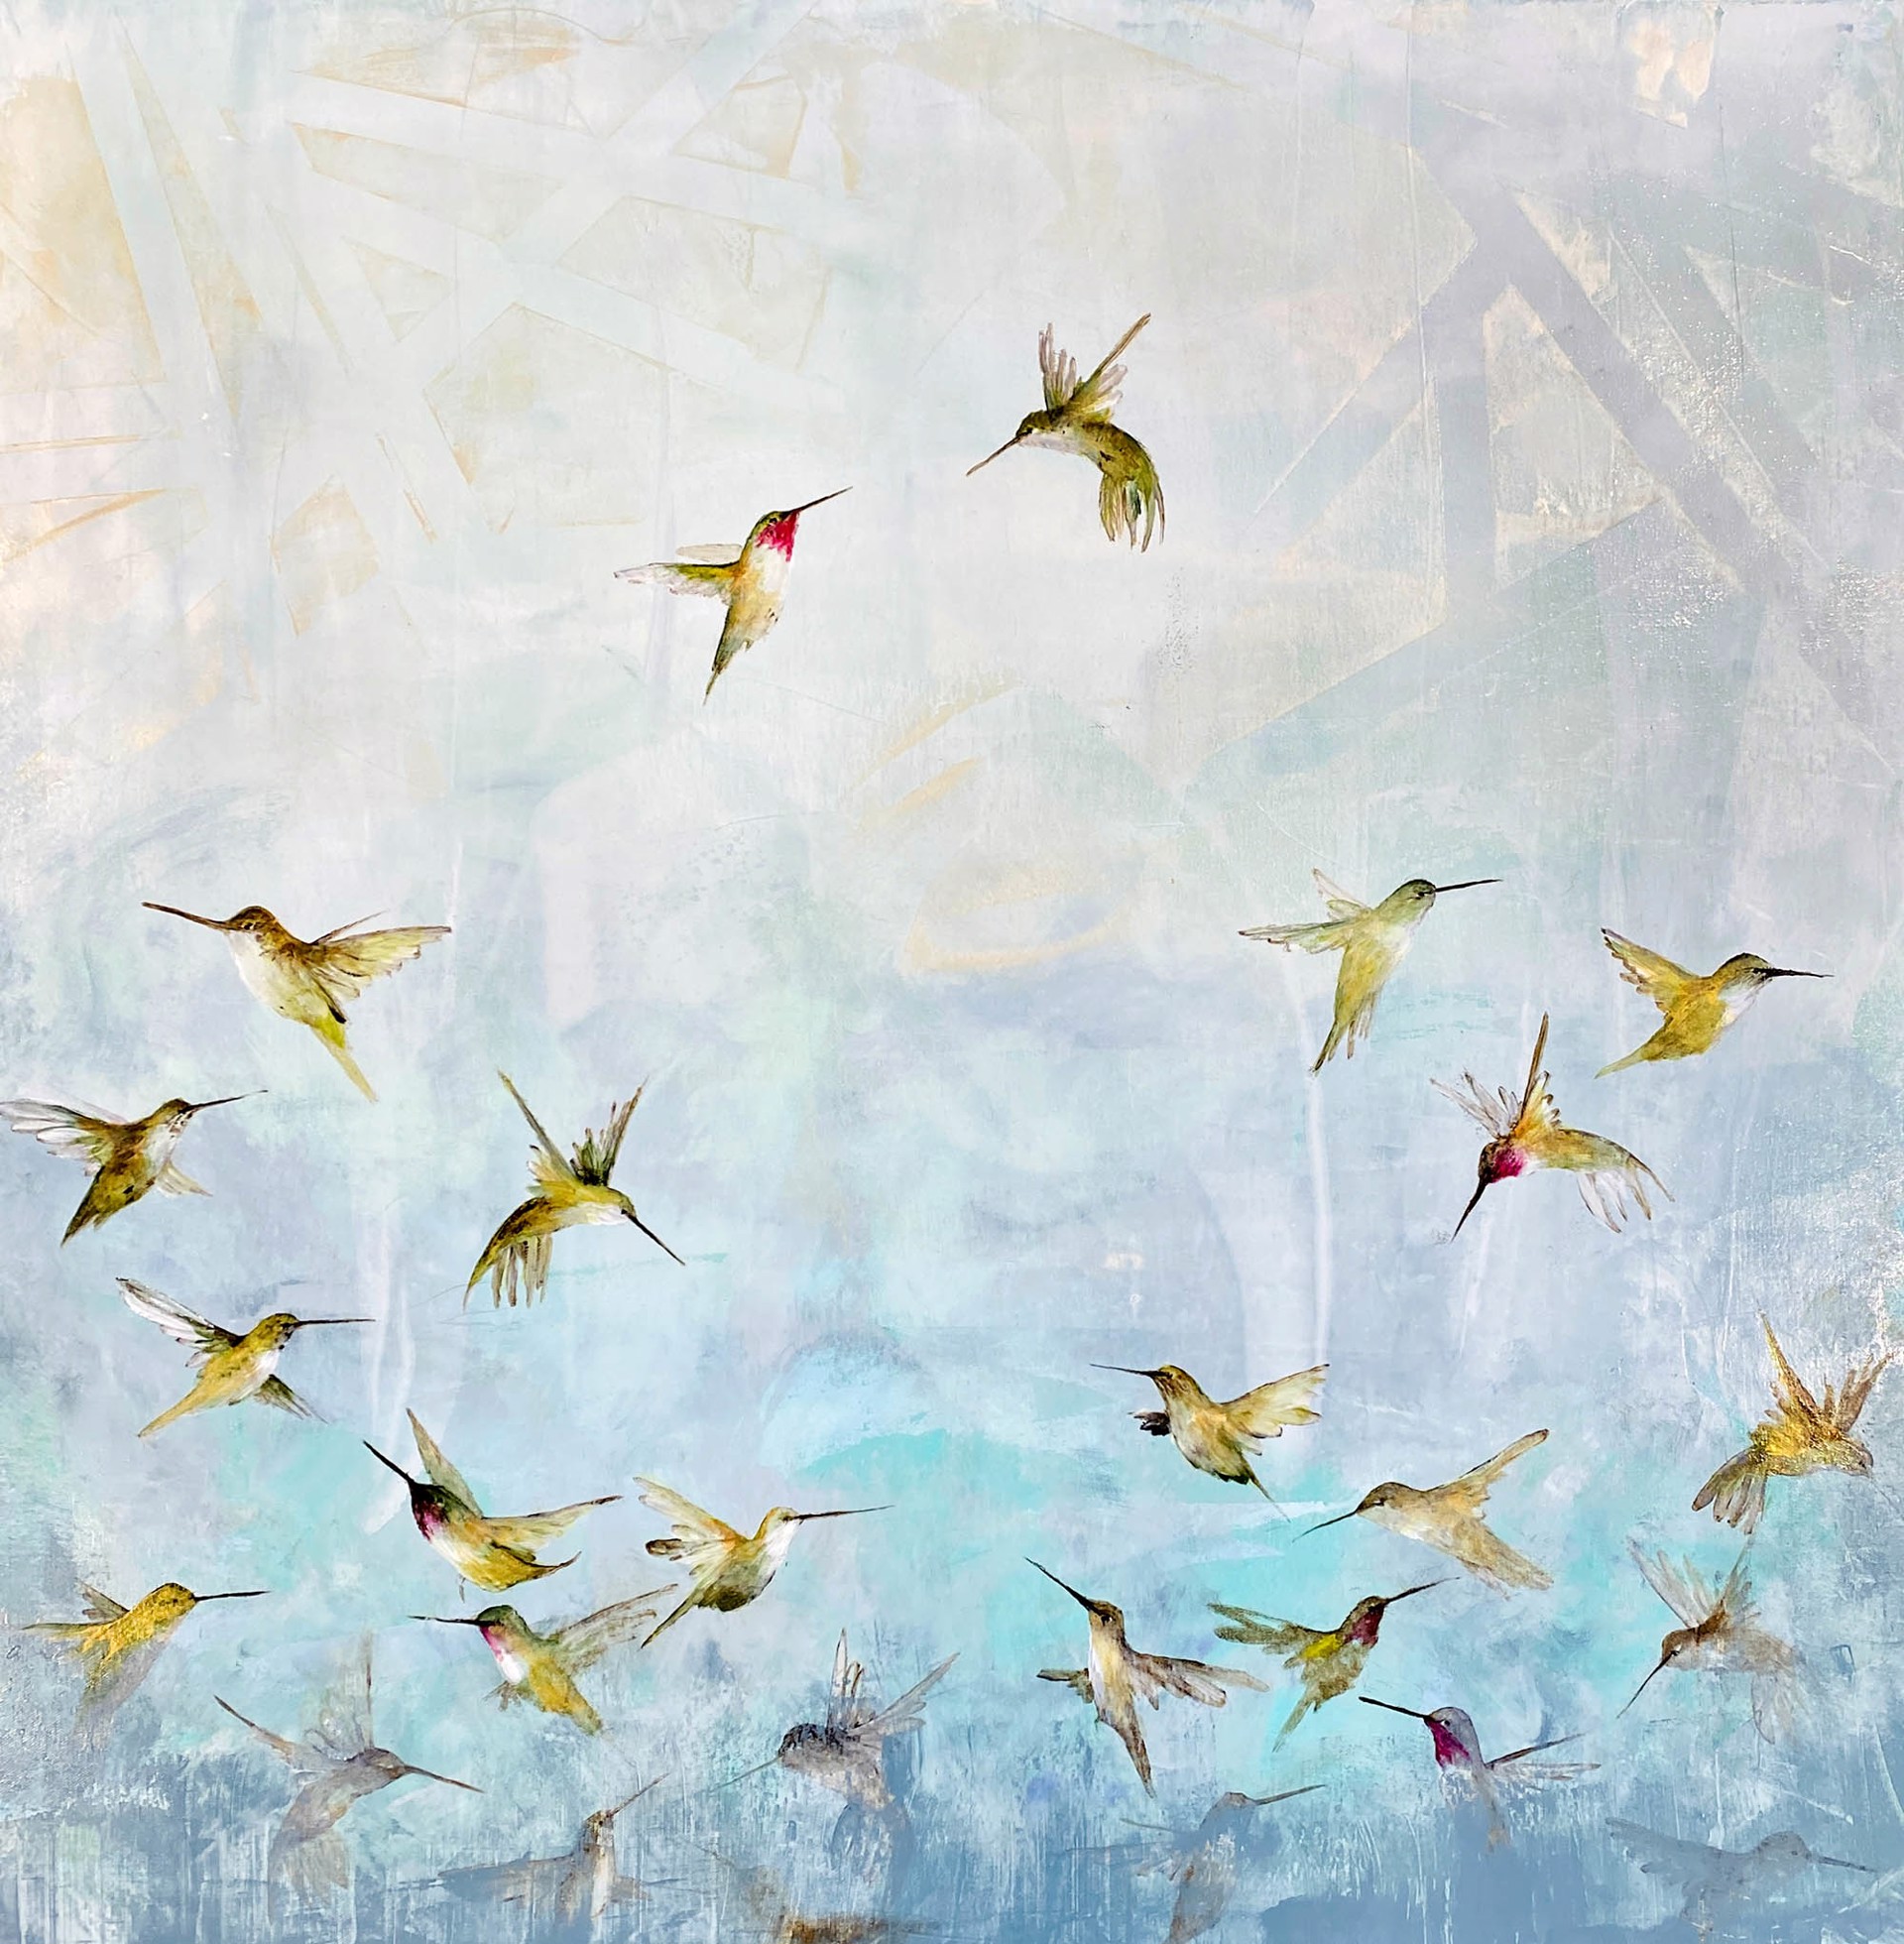 Original Oil Painting Featuring A Flurry Of Hummingbirds In Flight Over Abstract Blue Background